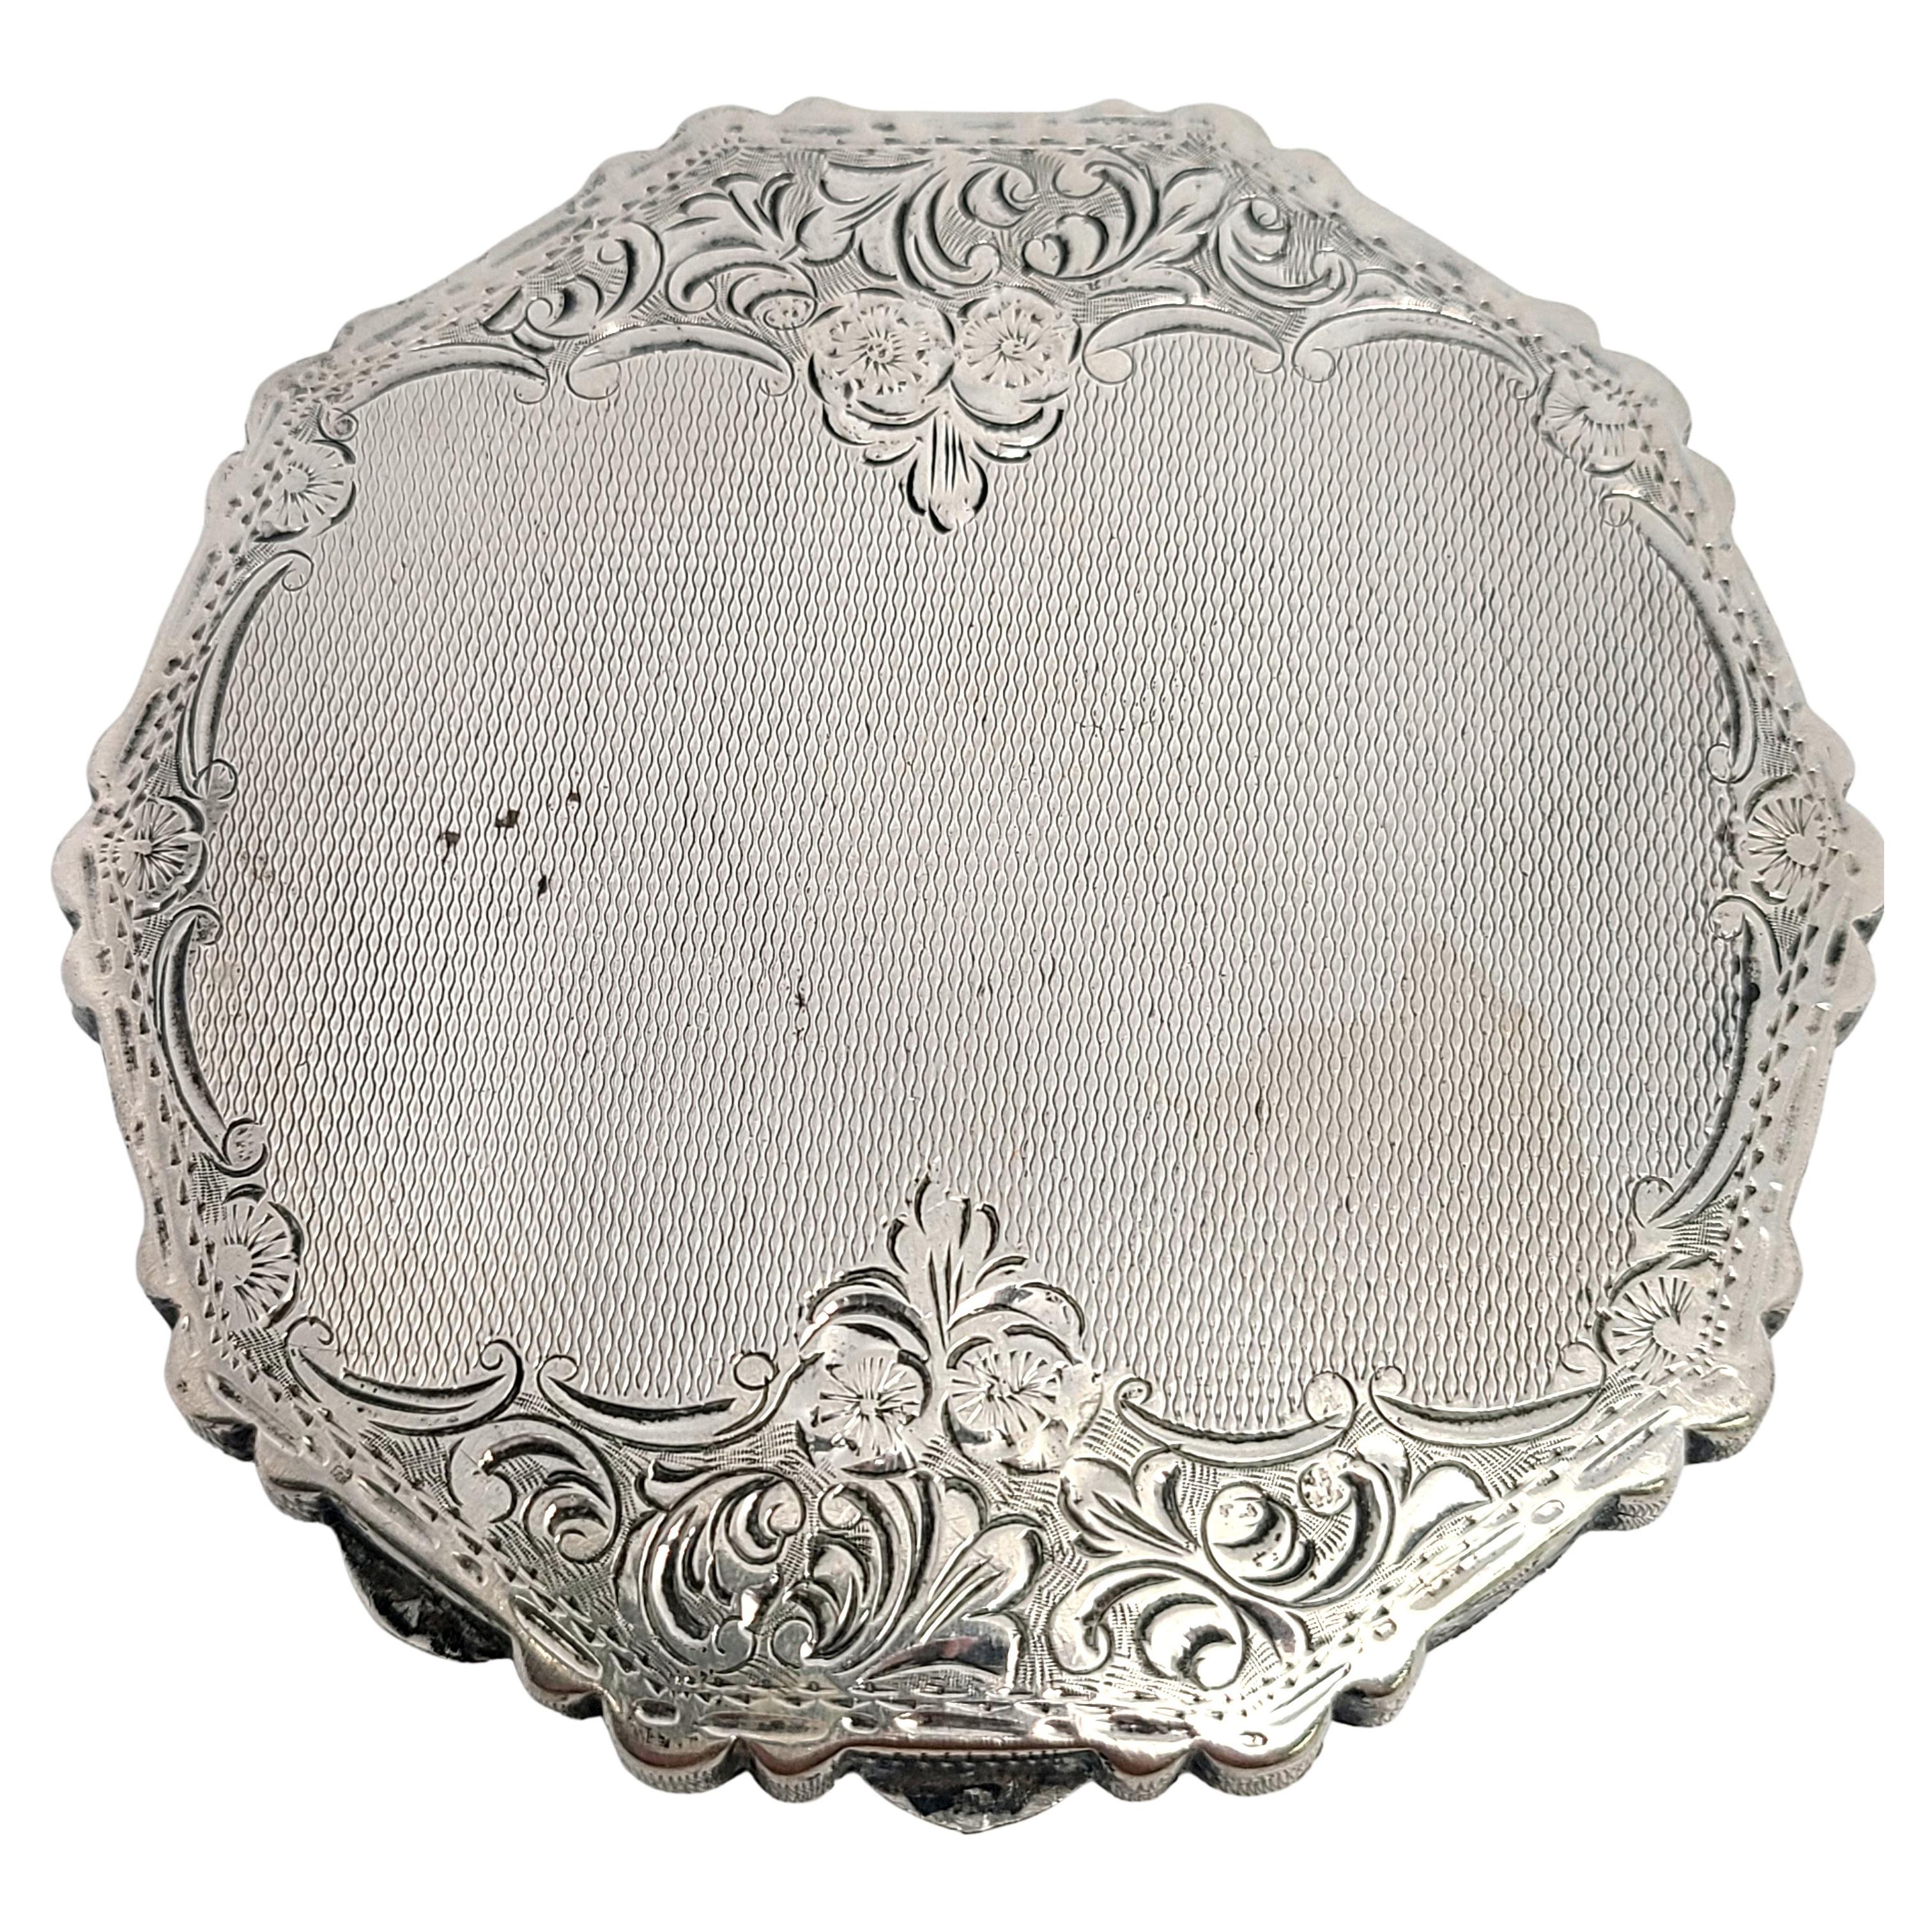 Women's or Men's 900 Silver Large Compact For Sale